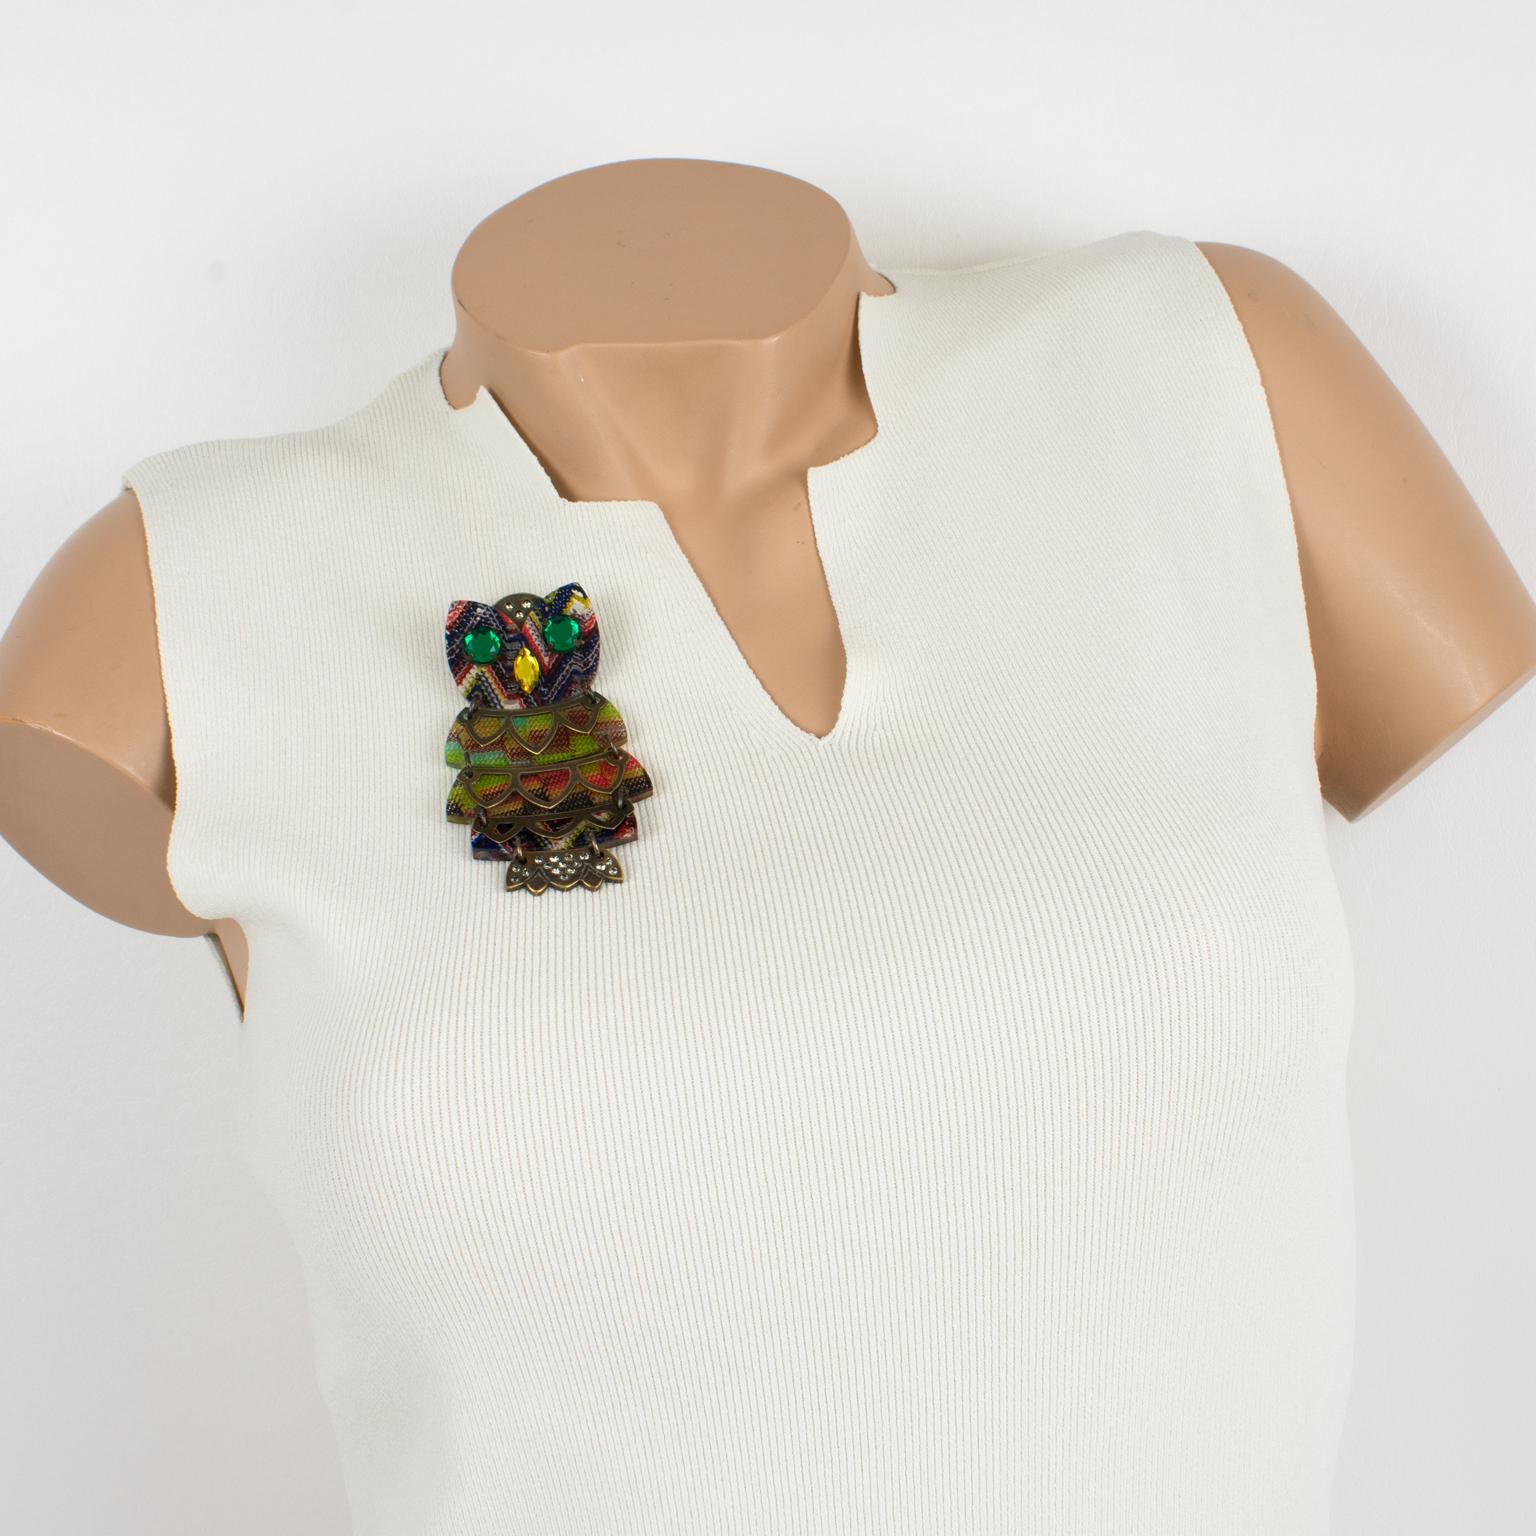 An iconic Missoni Italy pin brooch designed in the early 2000s featuring an articulated owl. The animal is built with antique patina brass with Lucite elements embedded with the iconic Missoni knitted fabric. The animal also has green crystal